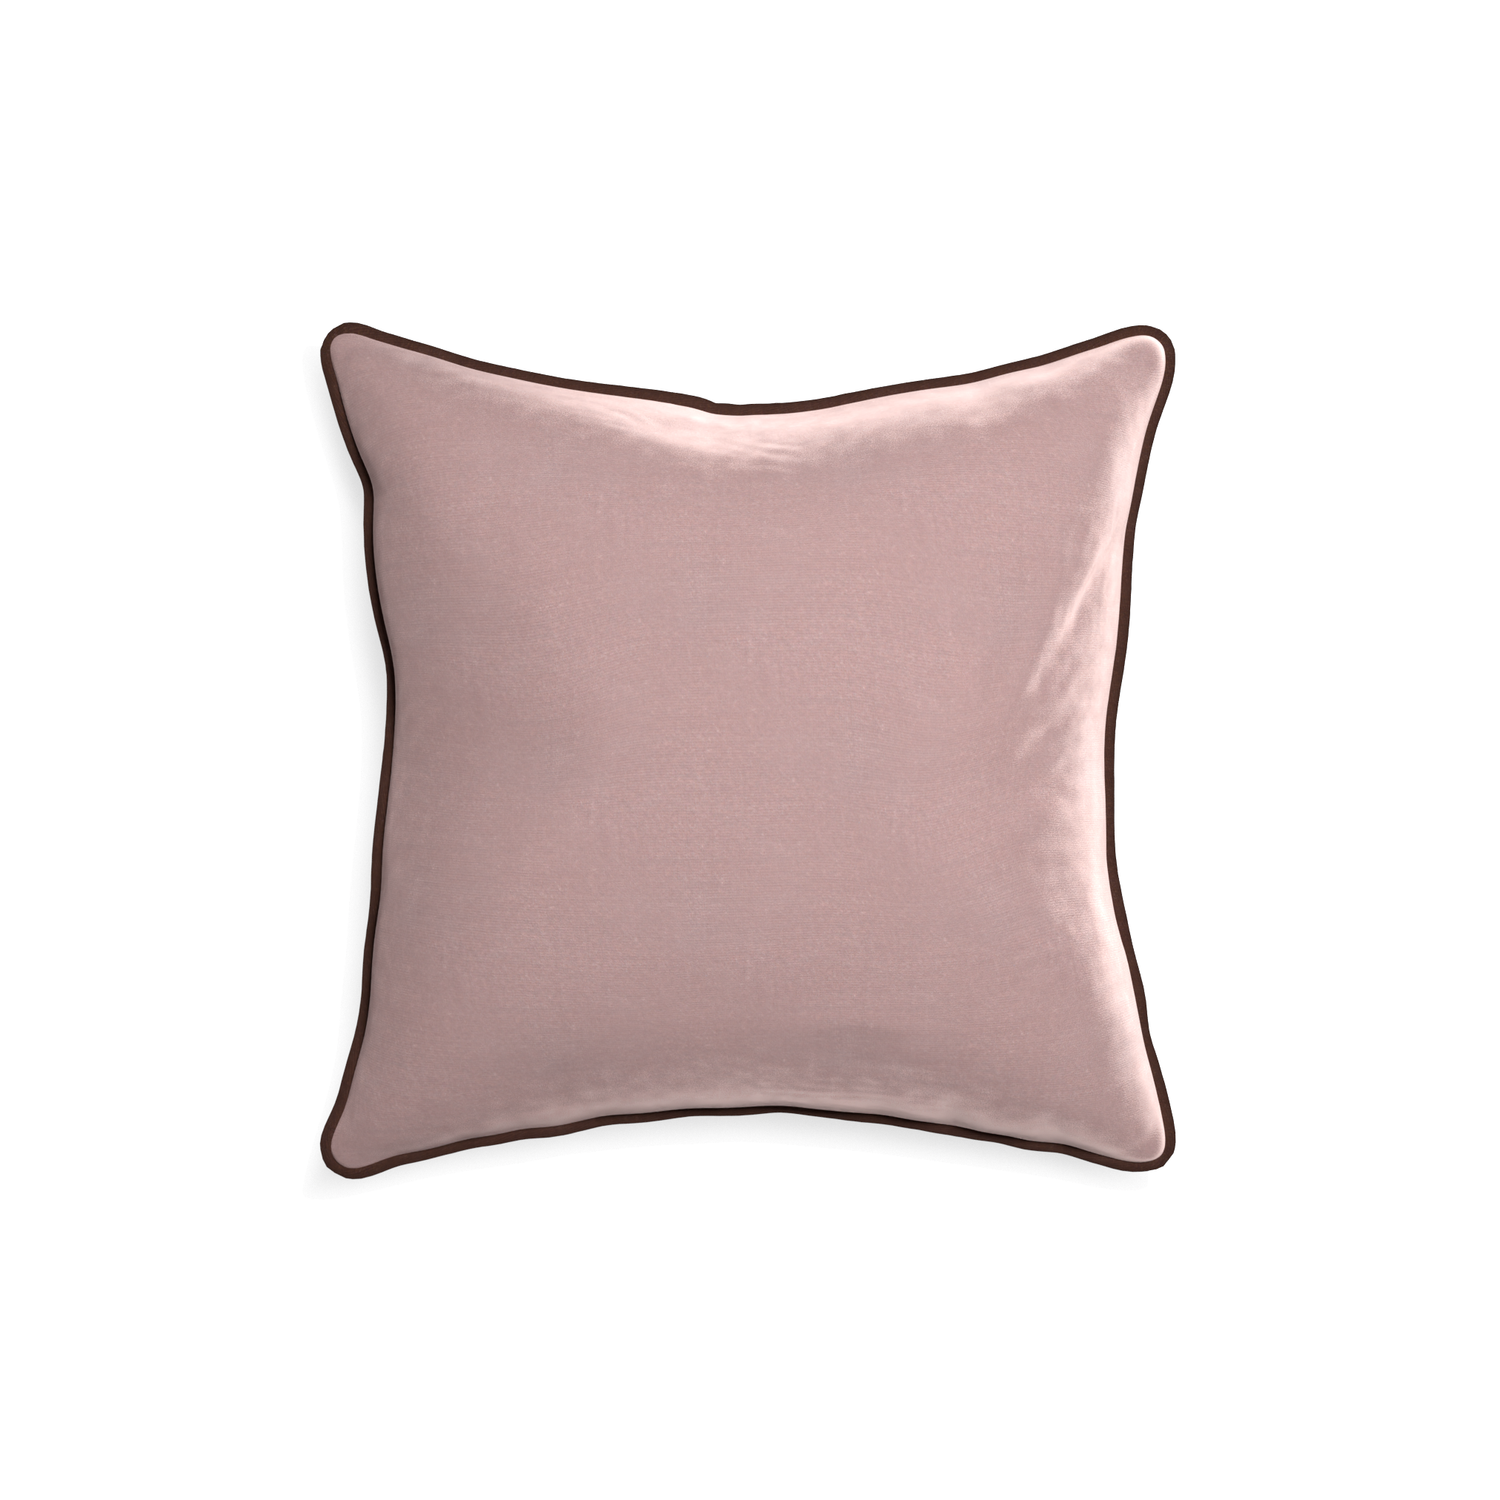 18-square mauve velvet custom pillow with w piping on white background